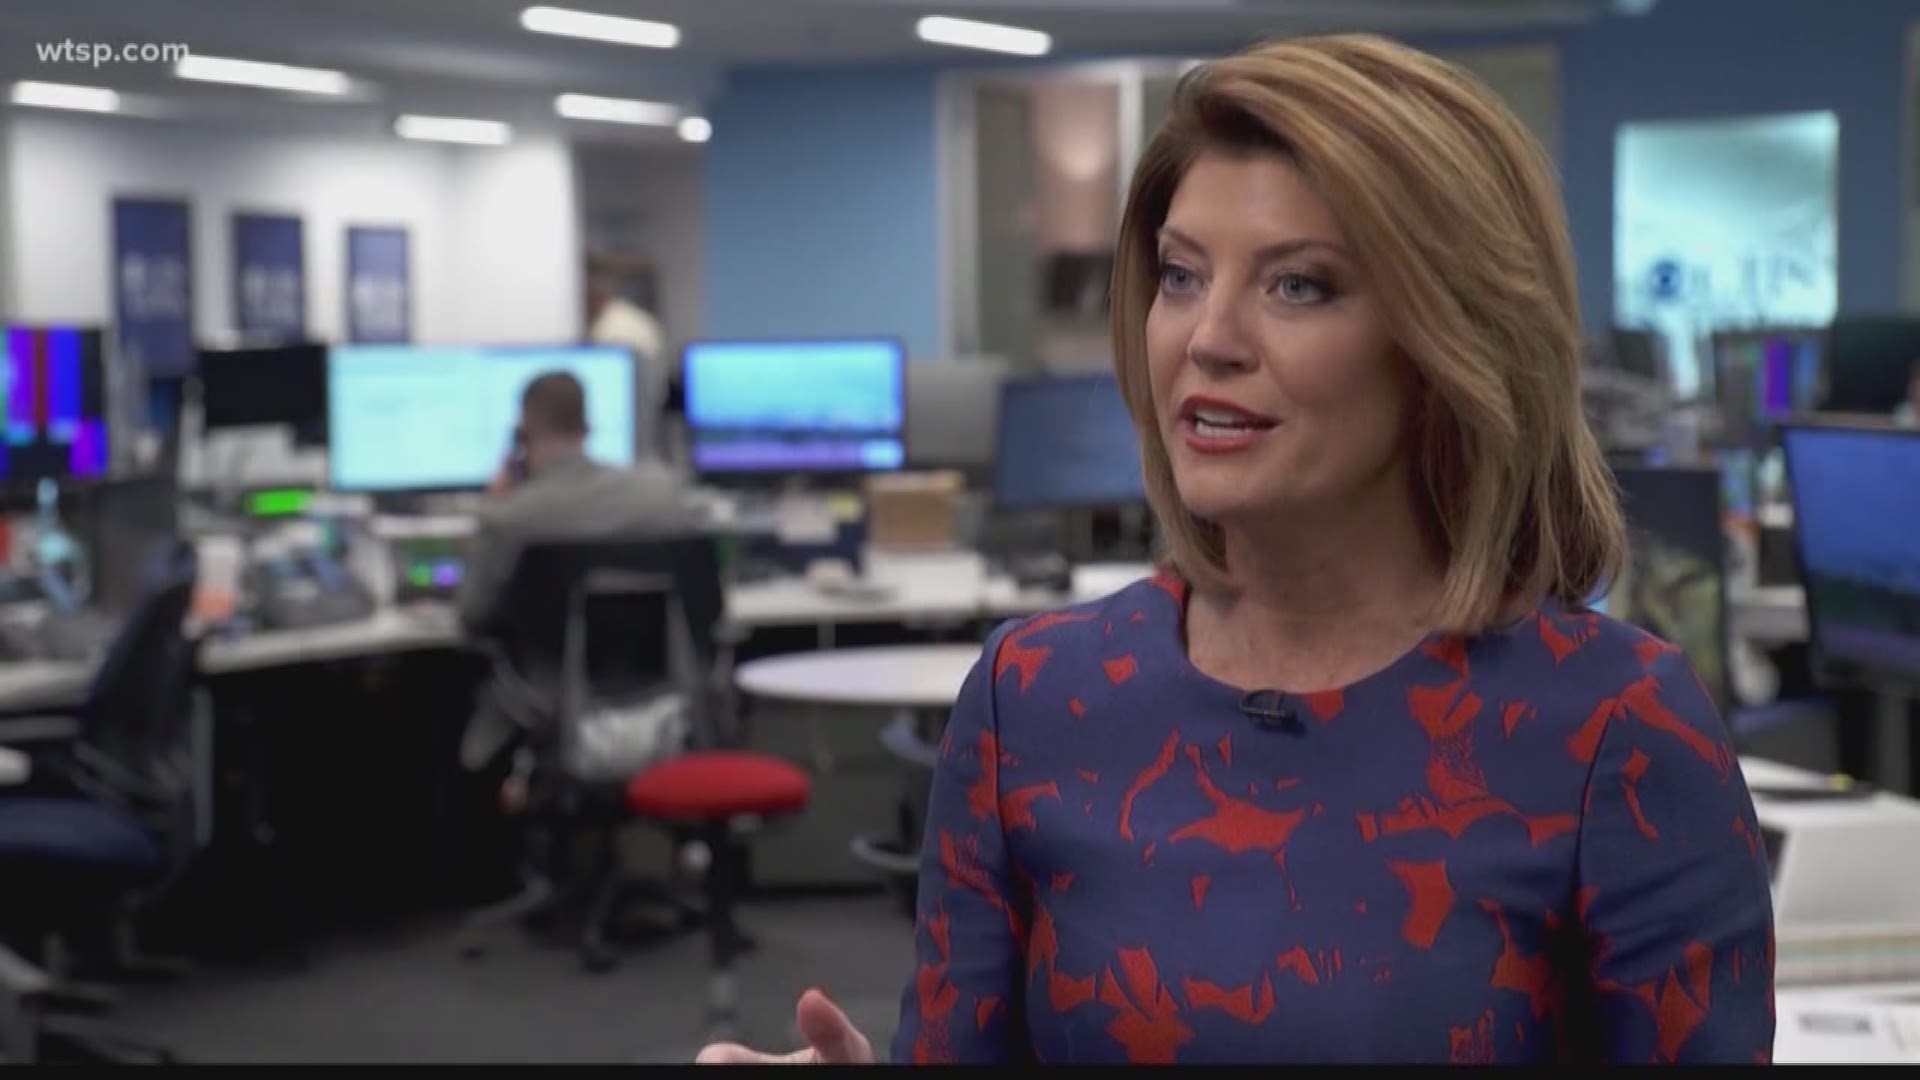 Norah O'Donnell, 45, spent seven years on "CBS This Morning." https://on.wtsp.com/2jSKOsJ